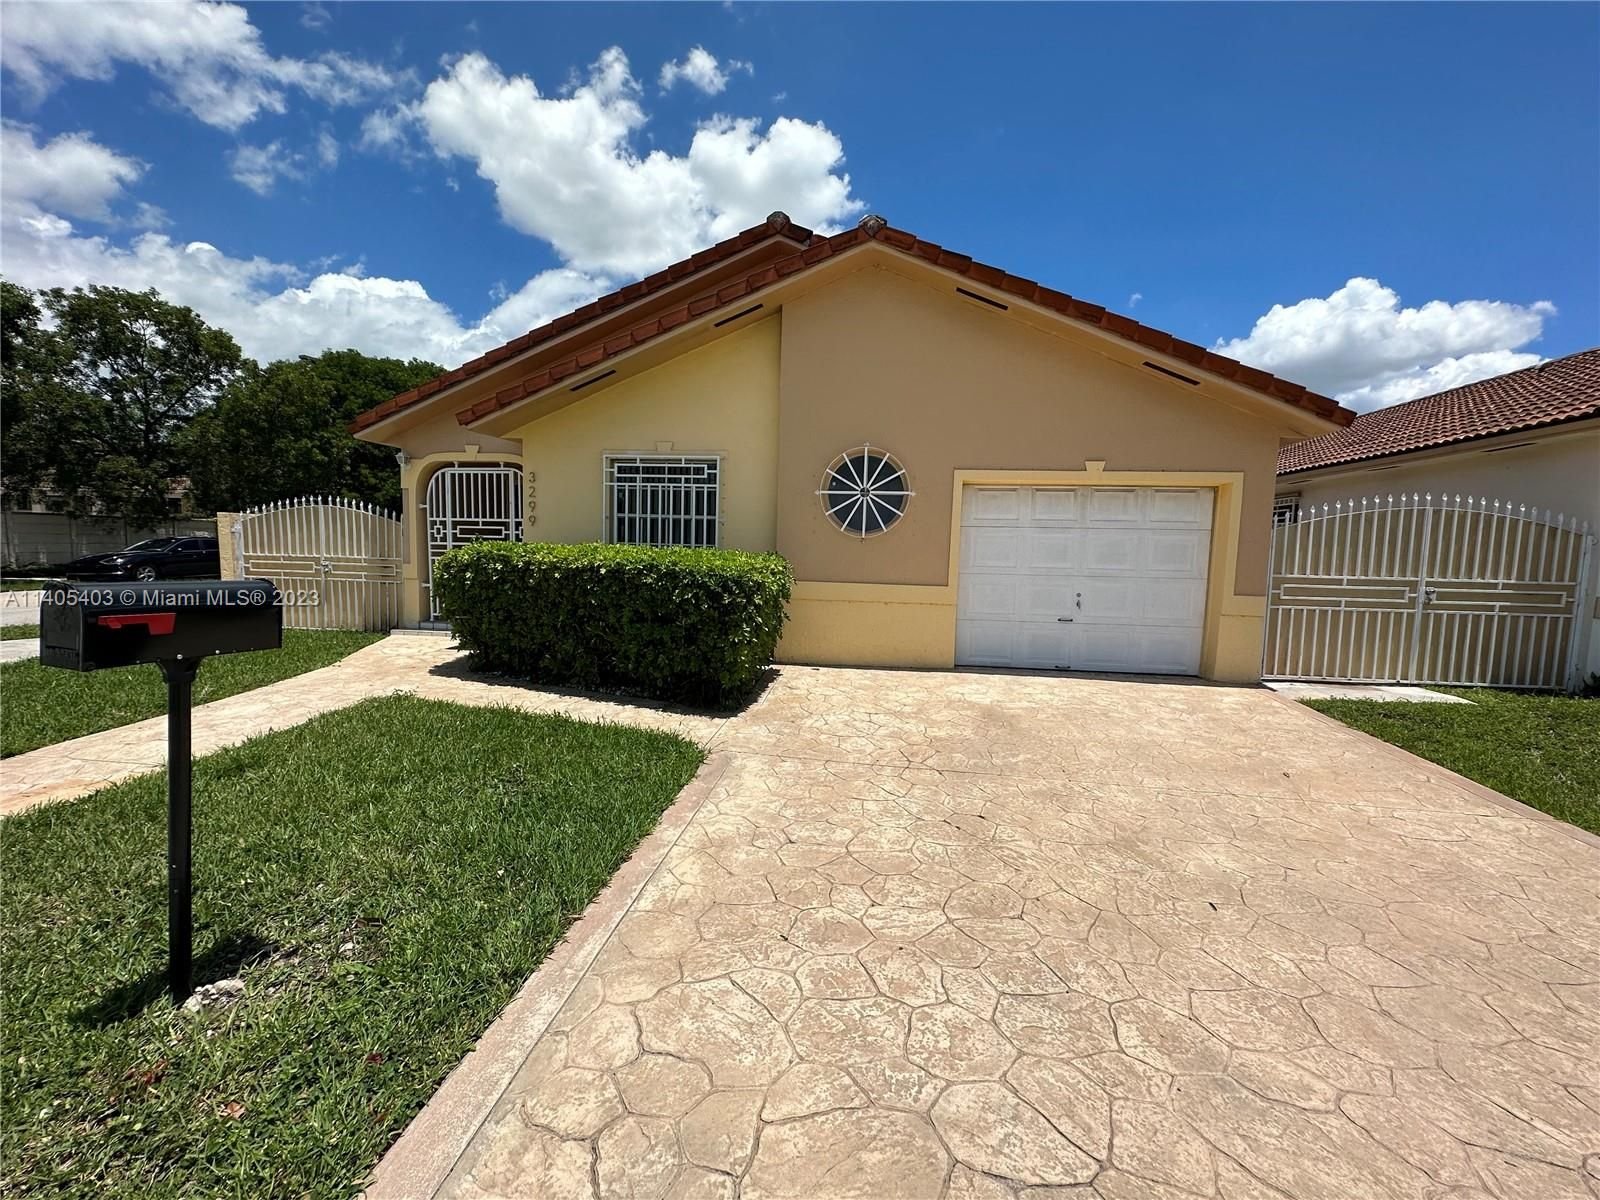 Real estate property located at 3299 76 St, Miami-Dade County, Hialeah, FL